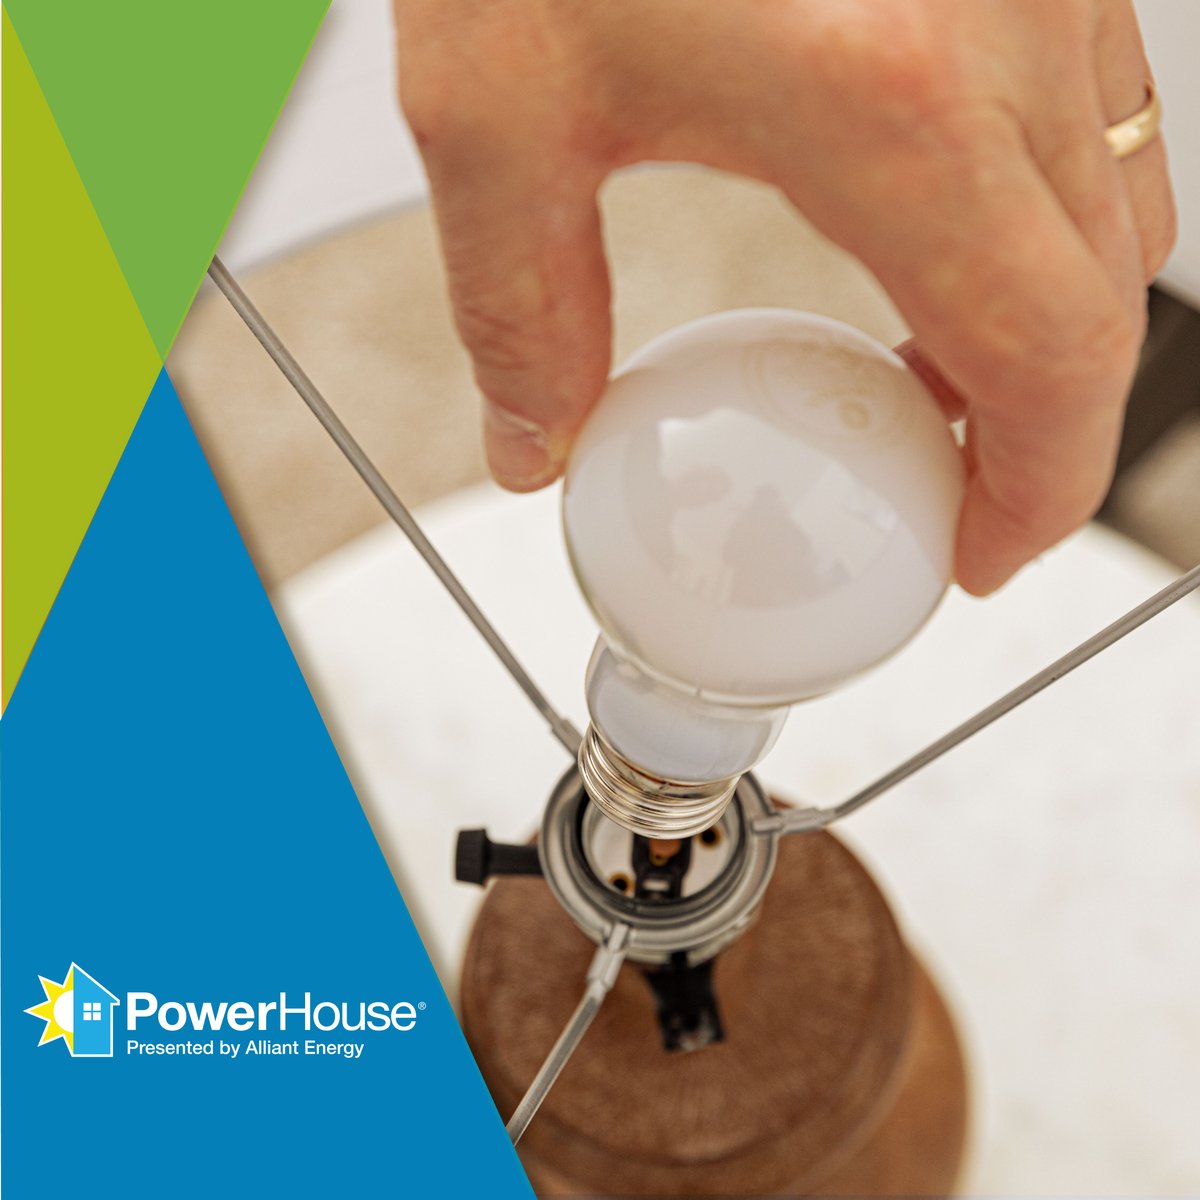 Lose your winter blues and switch to energy-efficient LEDs! Try this PowerHouse Tip of the Month. powerhousetv.com